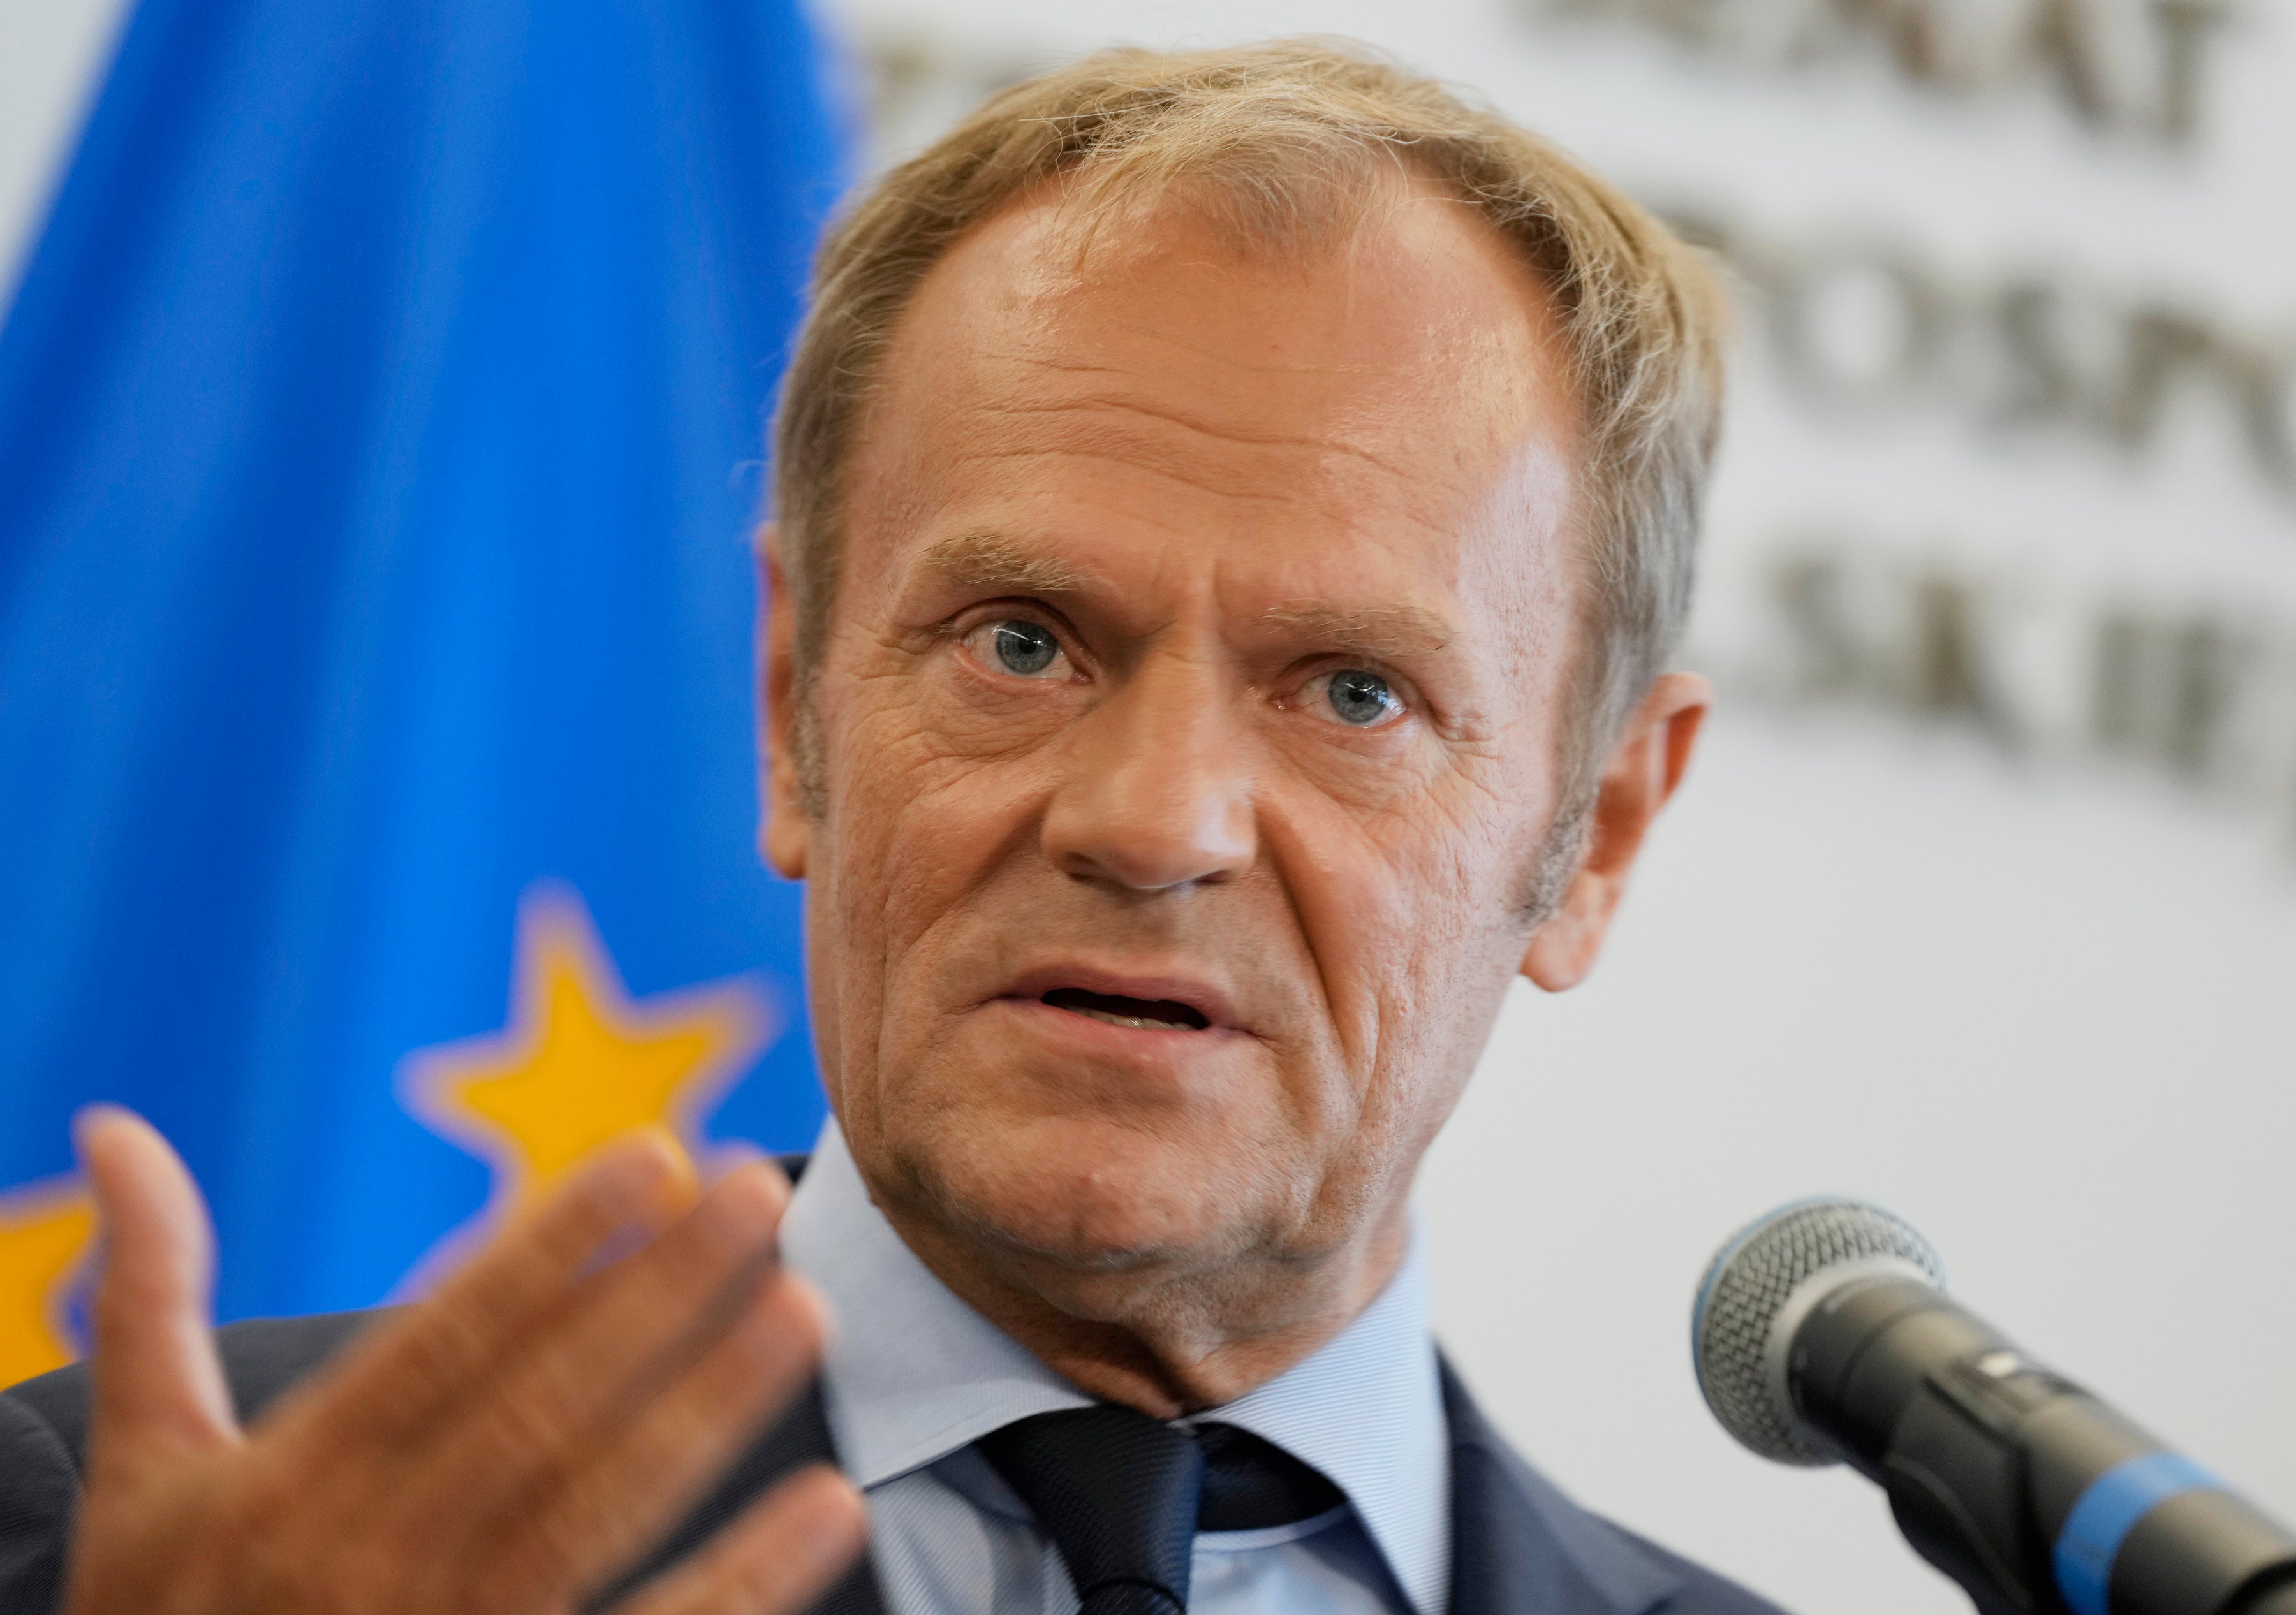 Donald Tusk was president of the European Council